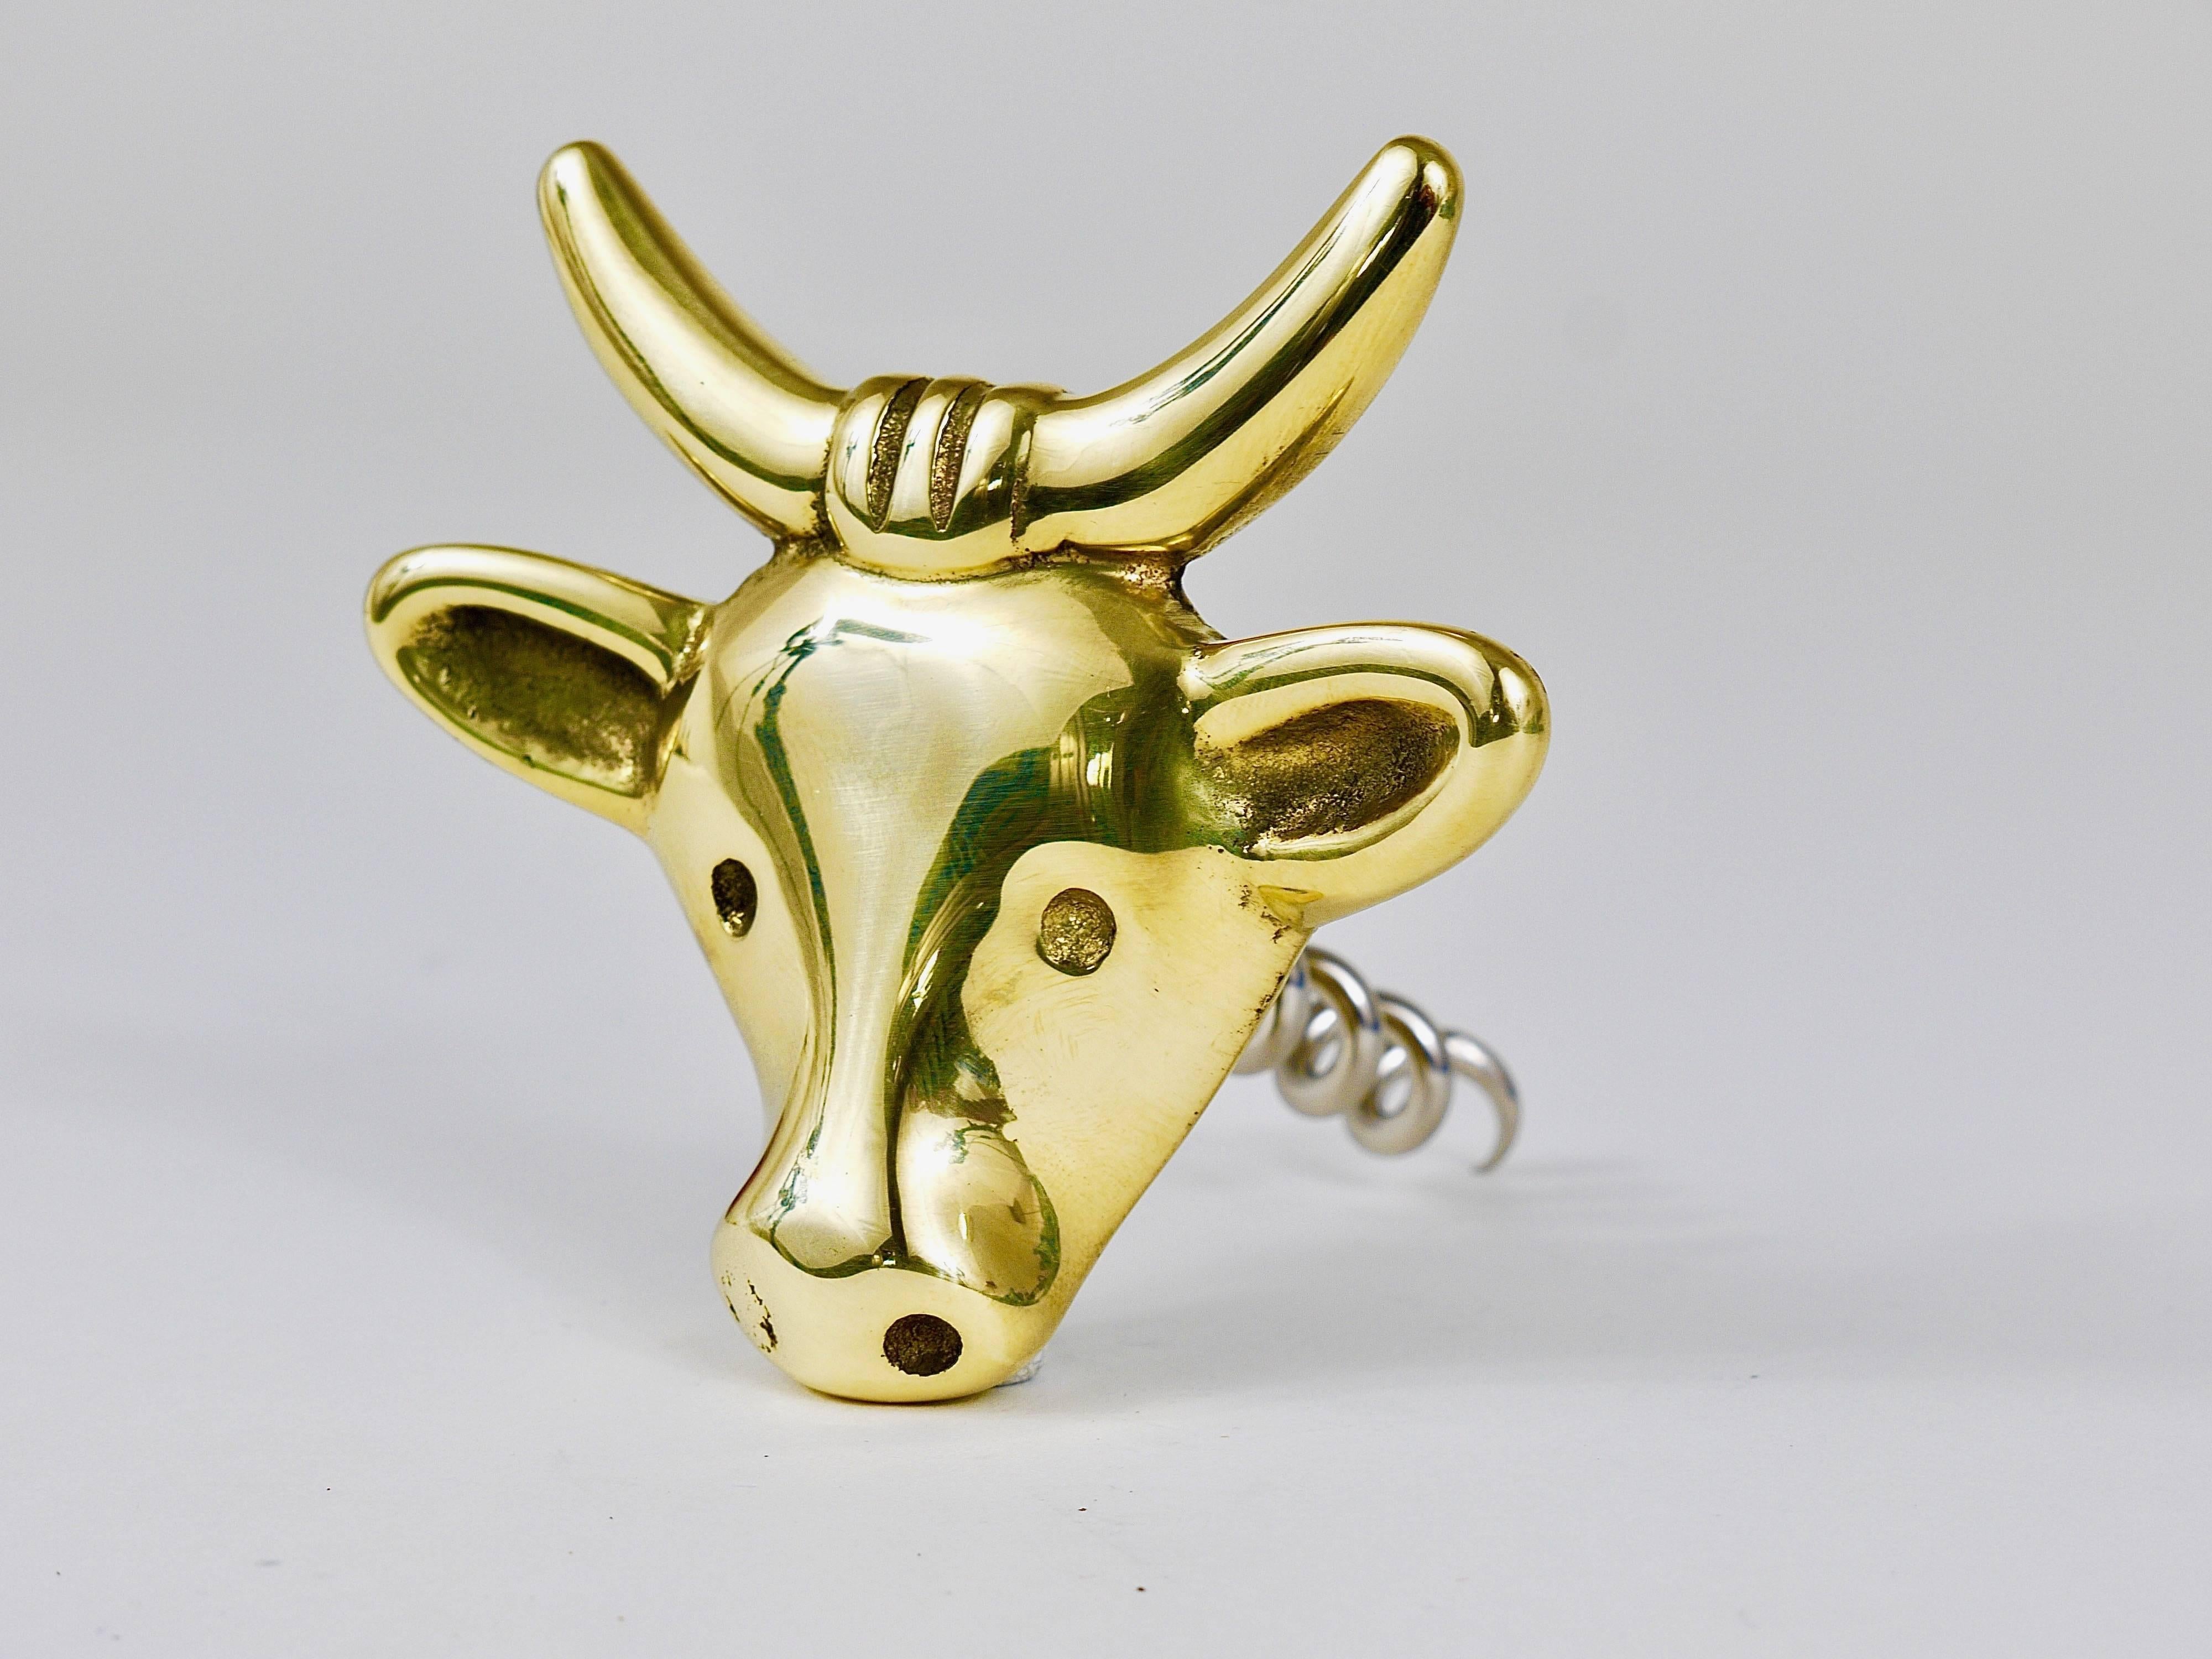 A charming Mid-Century bottle opener/cork screw, displaying a cow. A very humorous design by Walter Bosse, executed by Hertha Baller Austria in the 1950s. Made of polished brass, in very good condition.